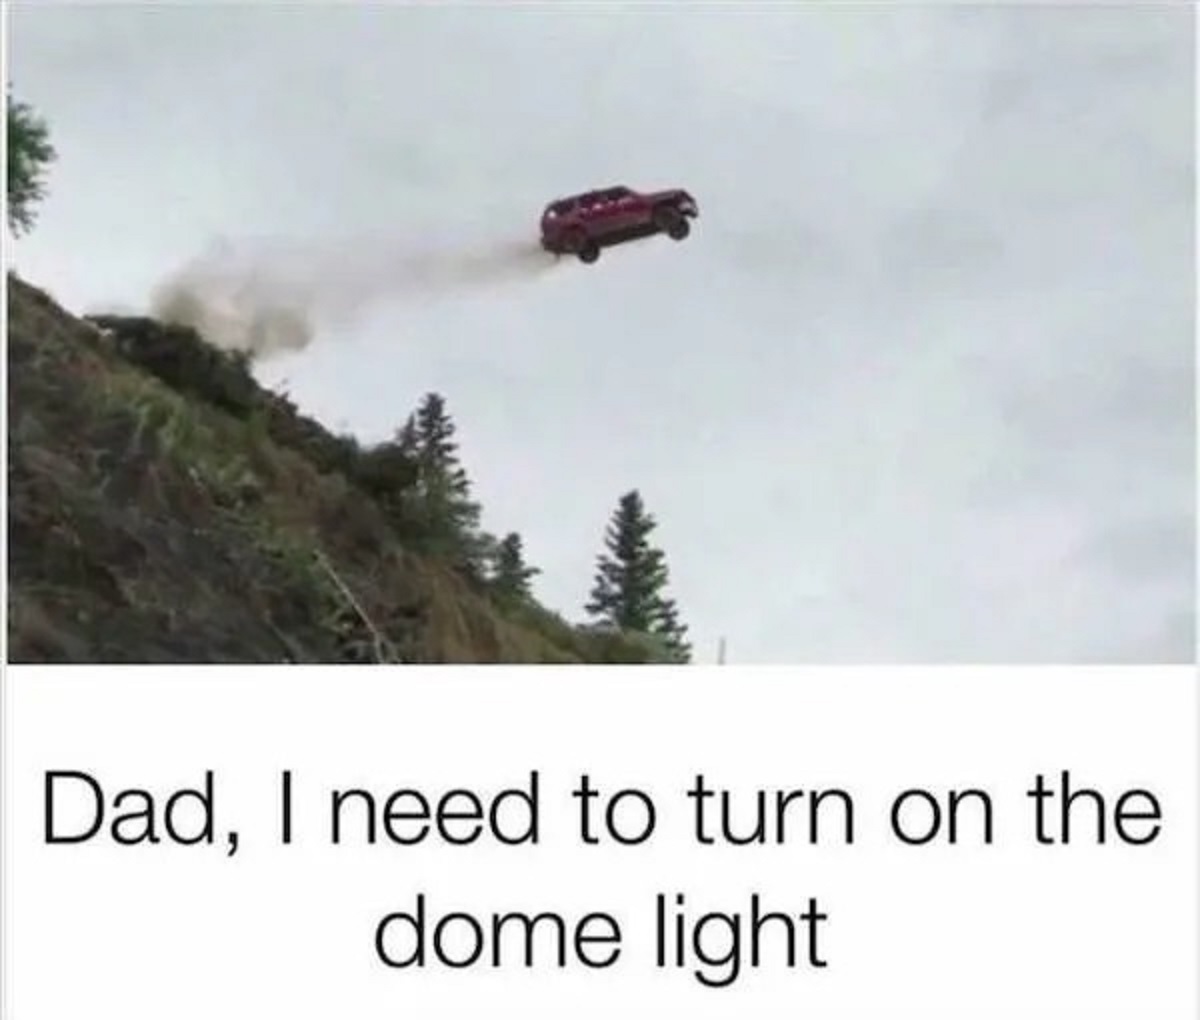 photo caption - Dad, I need to turn on the dome light